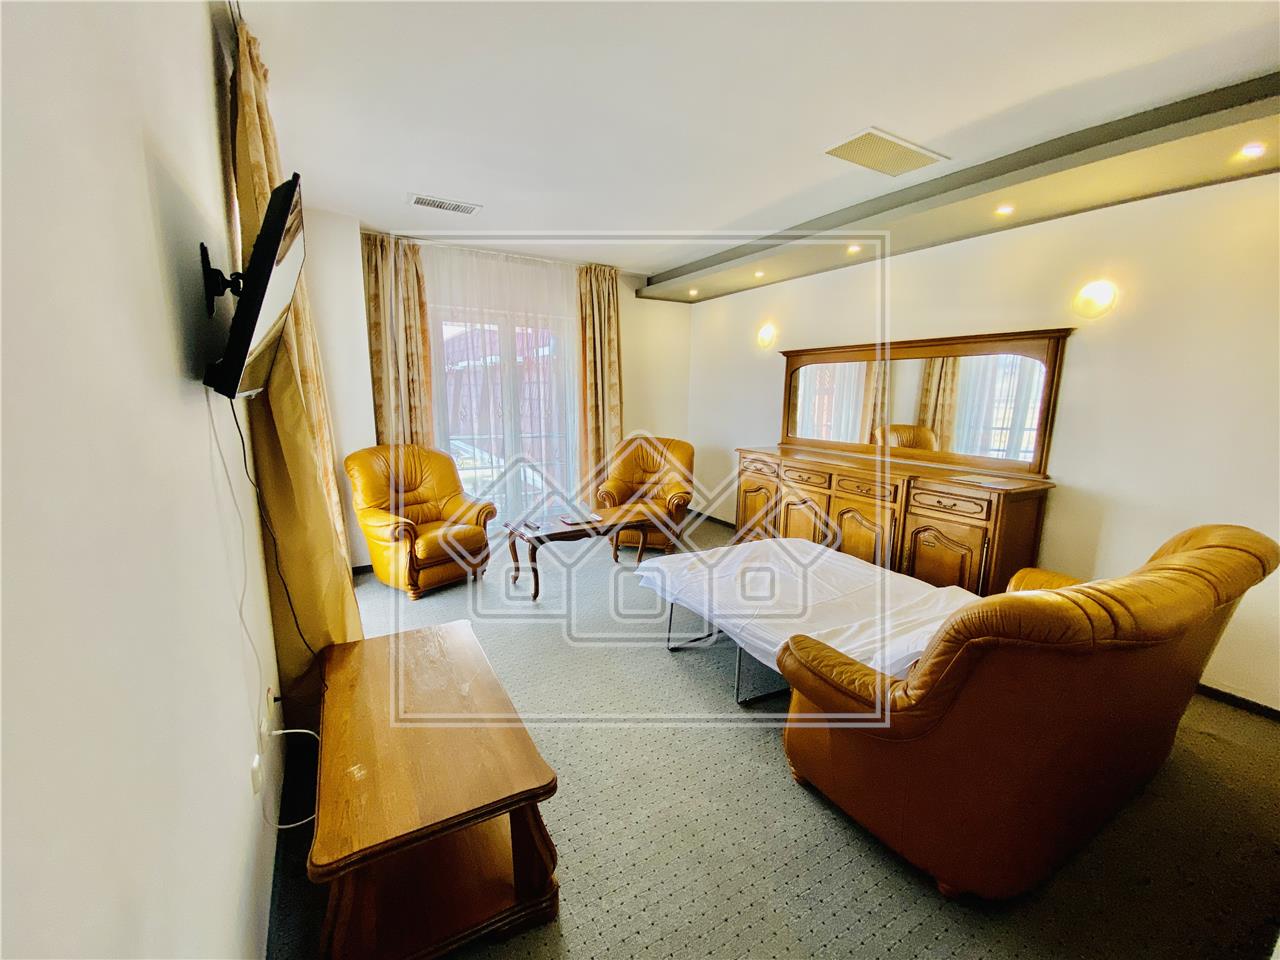 Hotel for sale in Sibiu - 3 stars - turnkey business